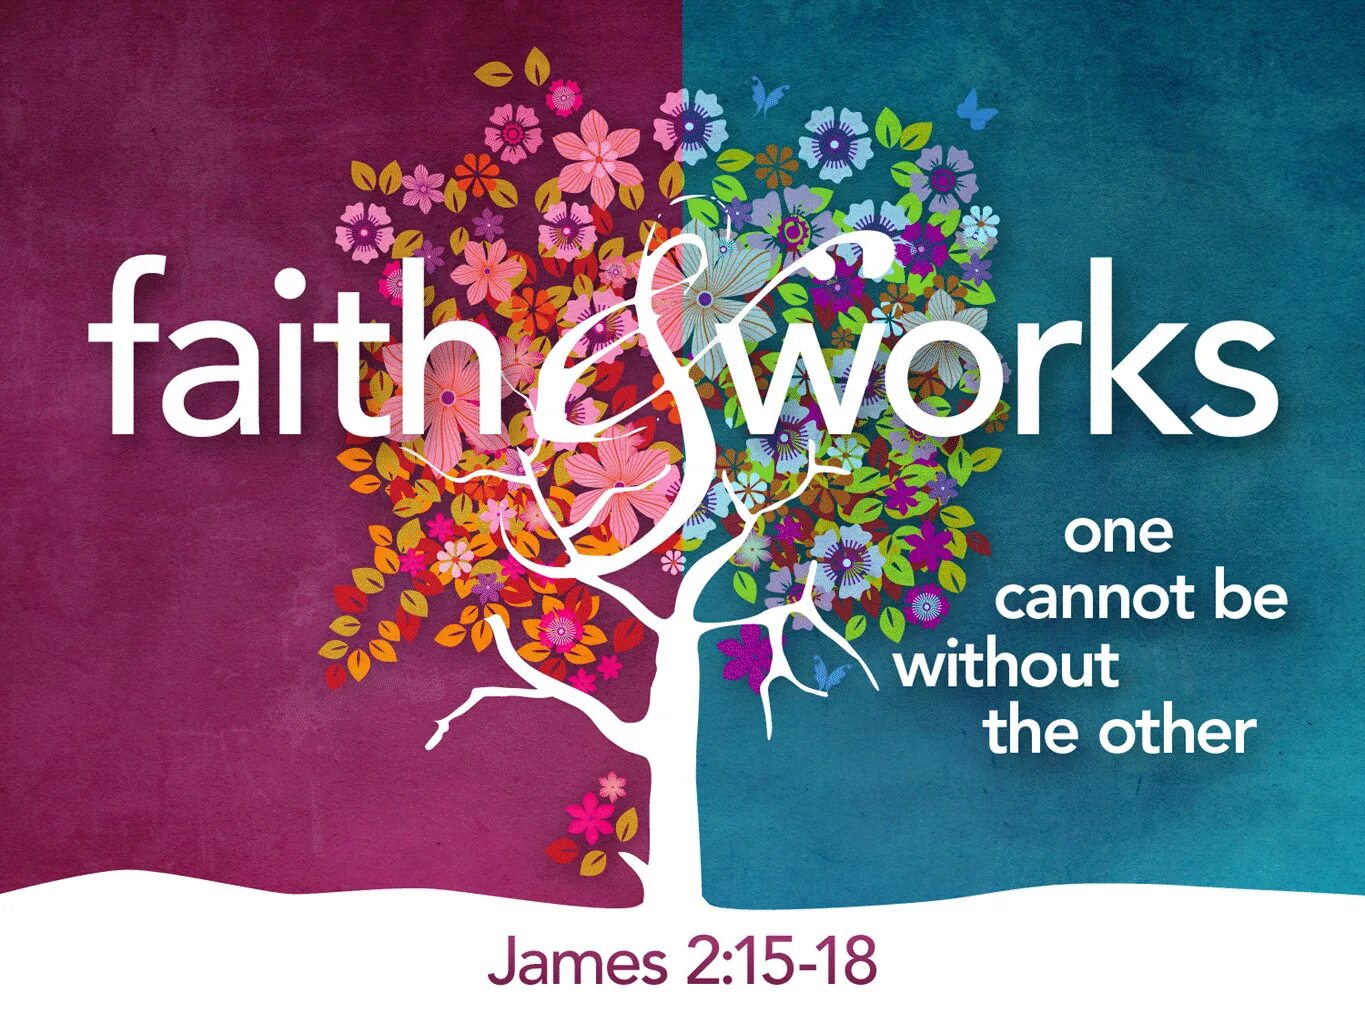 Faith without. Faith work. Cannot without you